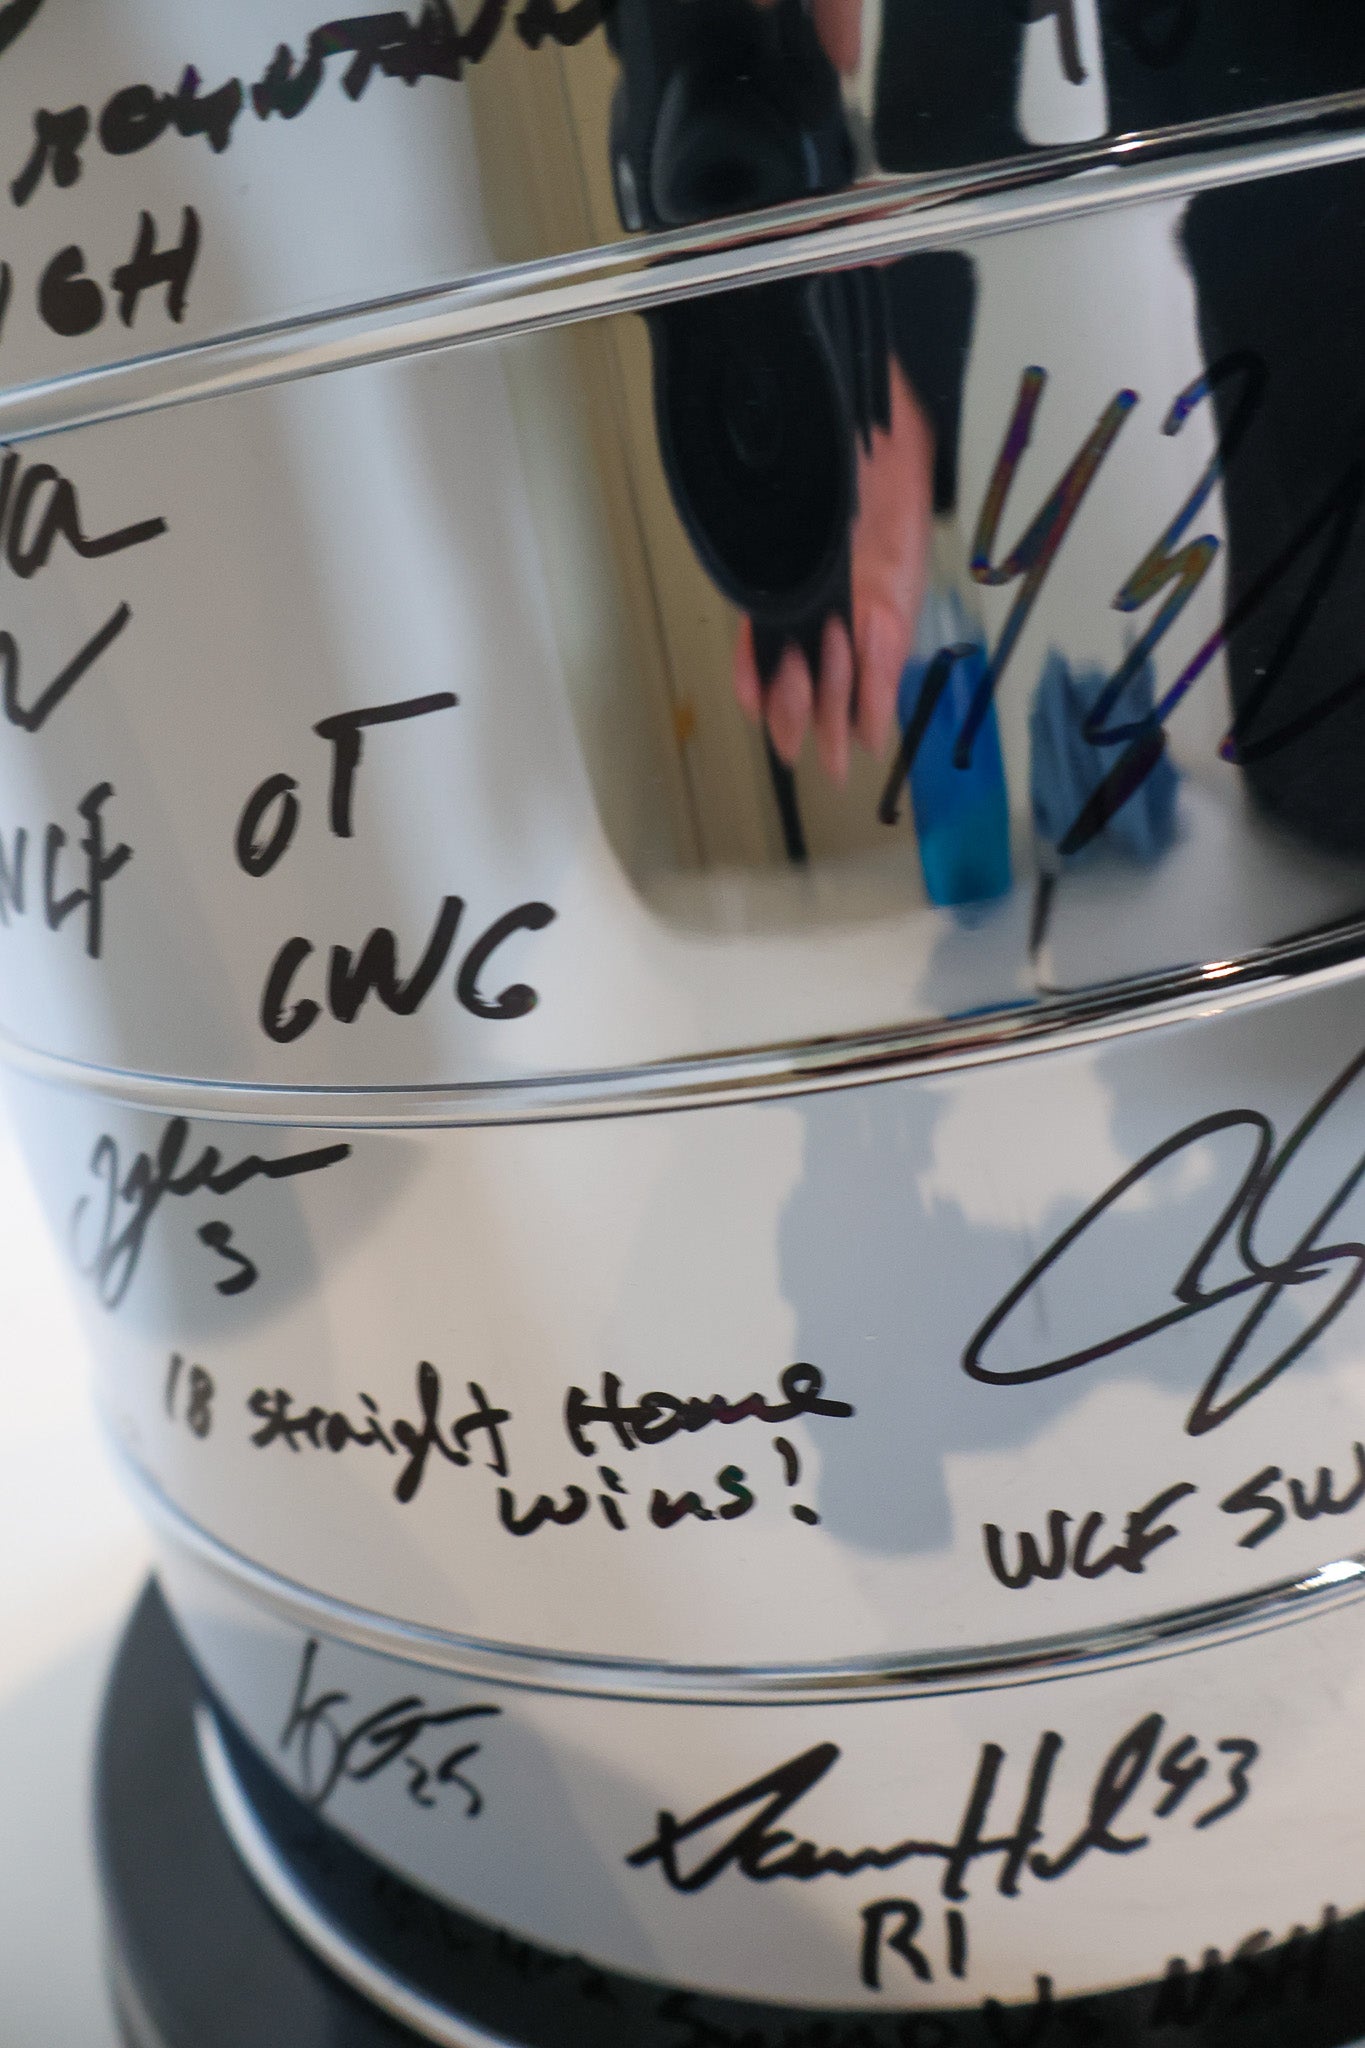 Colorado Avalanche Autographed Stanley Cup from 2022 Stanley Cup Team 18 signatures and Inscribed by each player